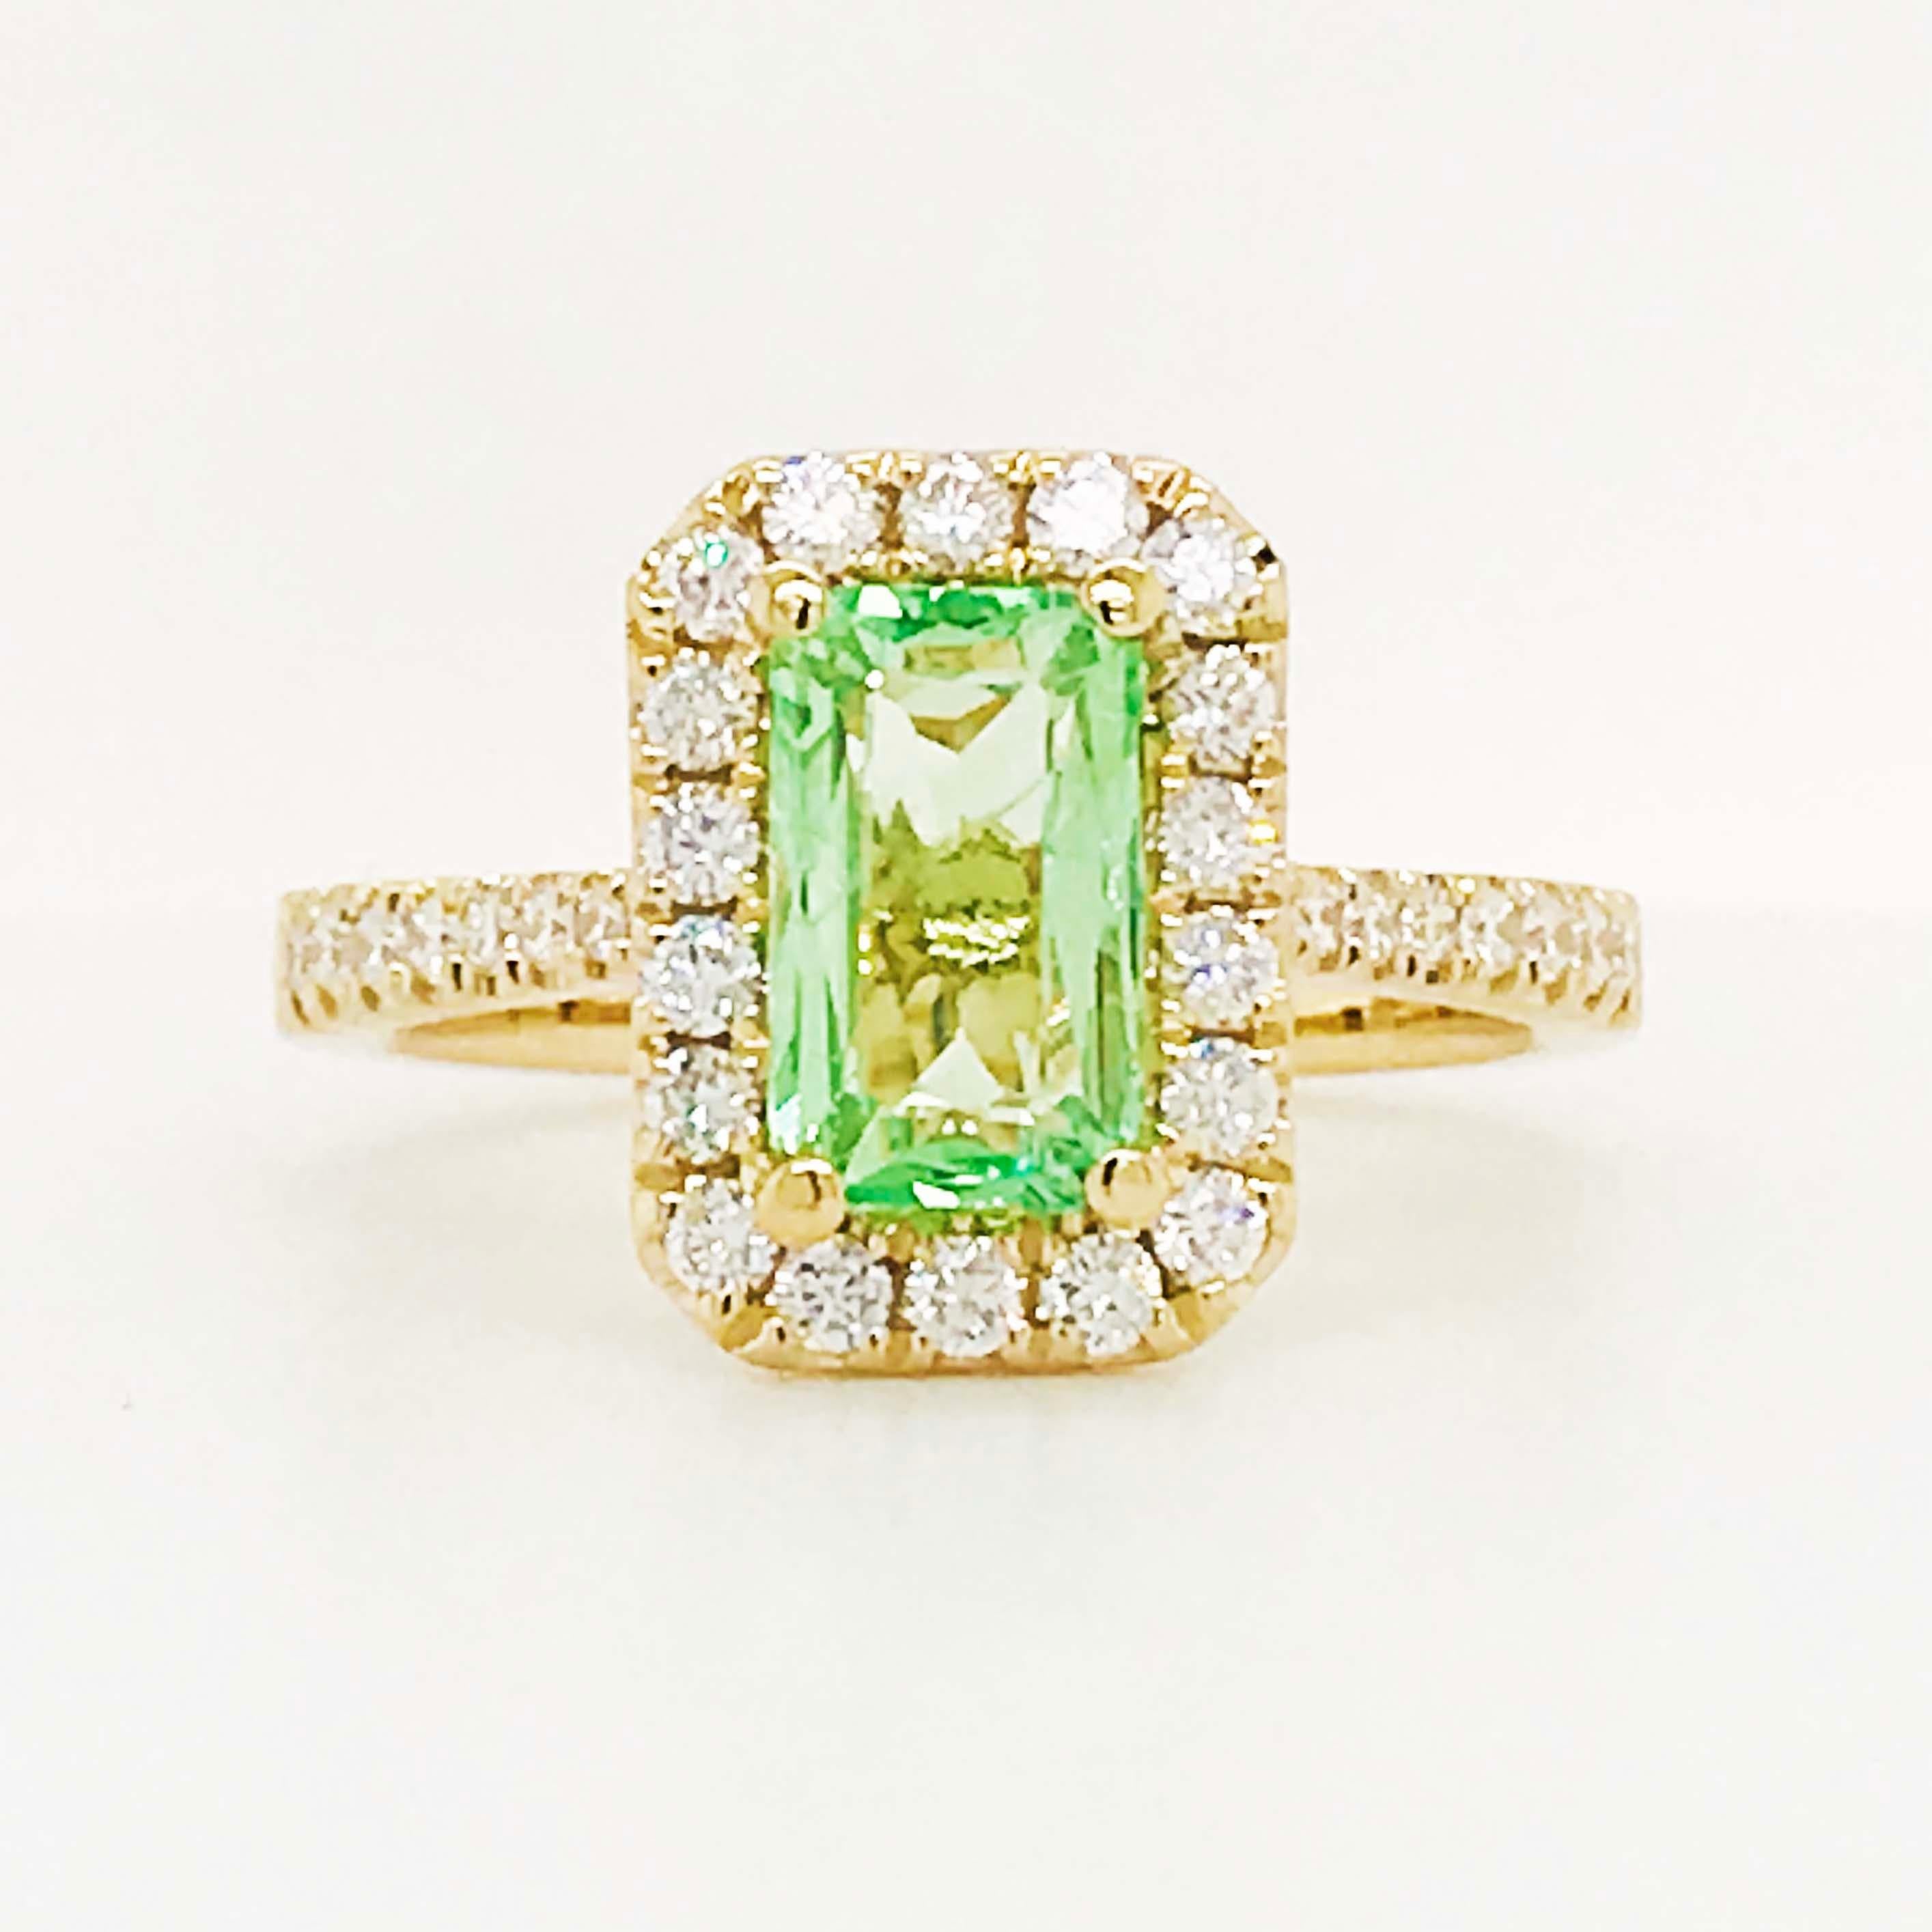 Stunning mint green tourmaline gemstone set in a unique designer setting! This ring was created by first starting with the center gemstone. The unusual and vibrantly light mint green tourmaline reflects the light so well and is well paired with our